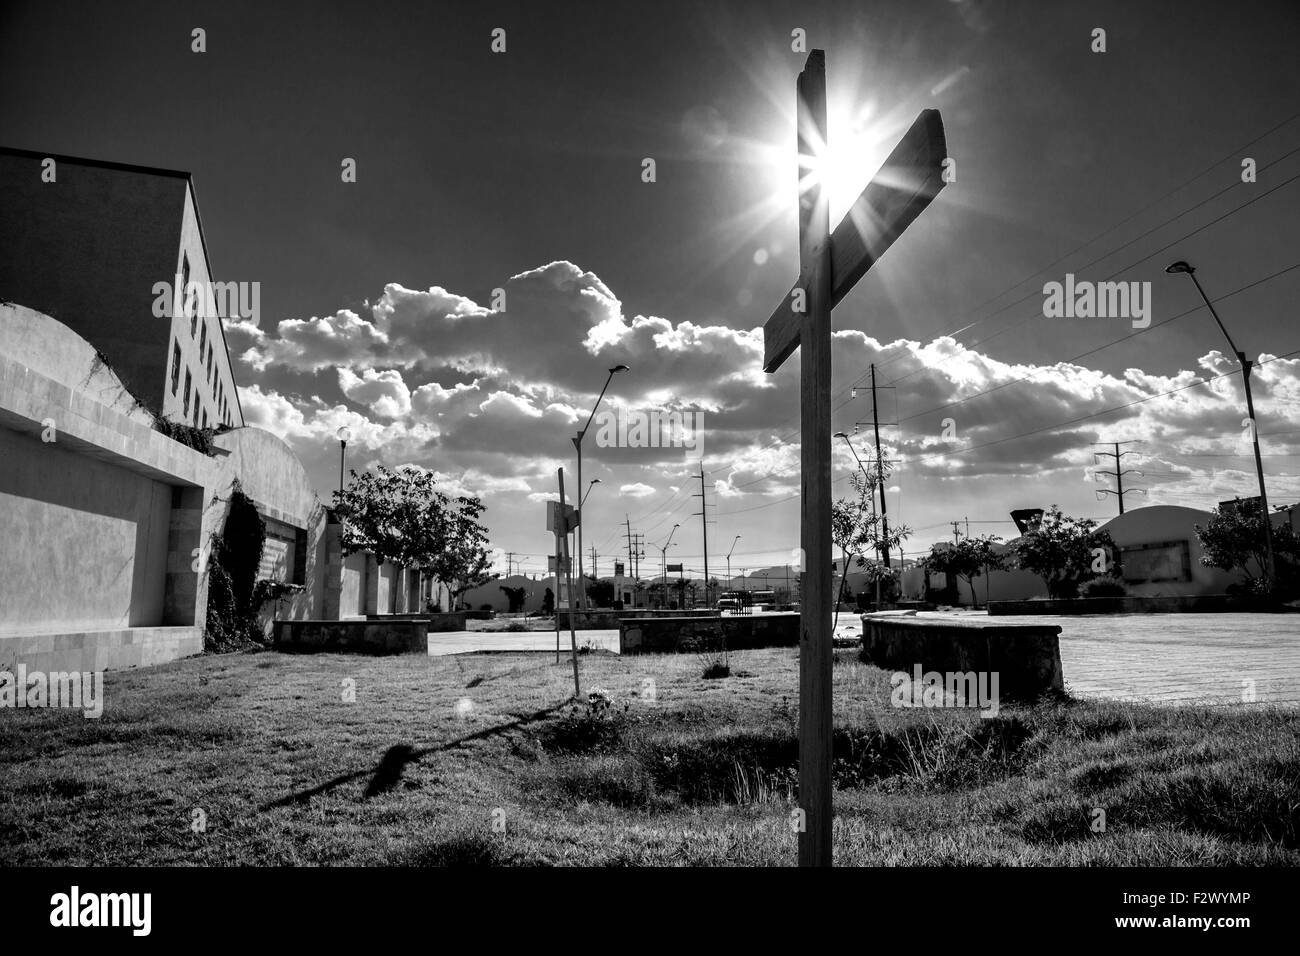 Ciudad Juarez, Mexico. 26th Sep, 2014. In November 2001 the mutilated remains of eight young women were found in a place known as 'the cotton field.' A memorial has since been erected in its place. It's a large area dominated by crosses that bear the names of the missing and dead. (Credit Image: © Gabriel Romero/zReportage.com via ZUMA Press) Stock Photo